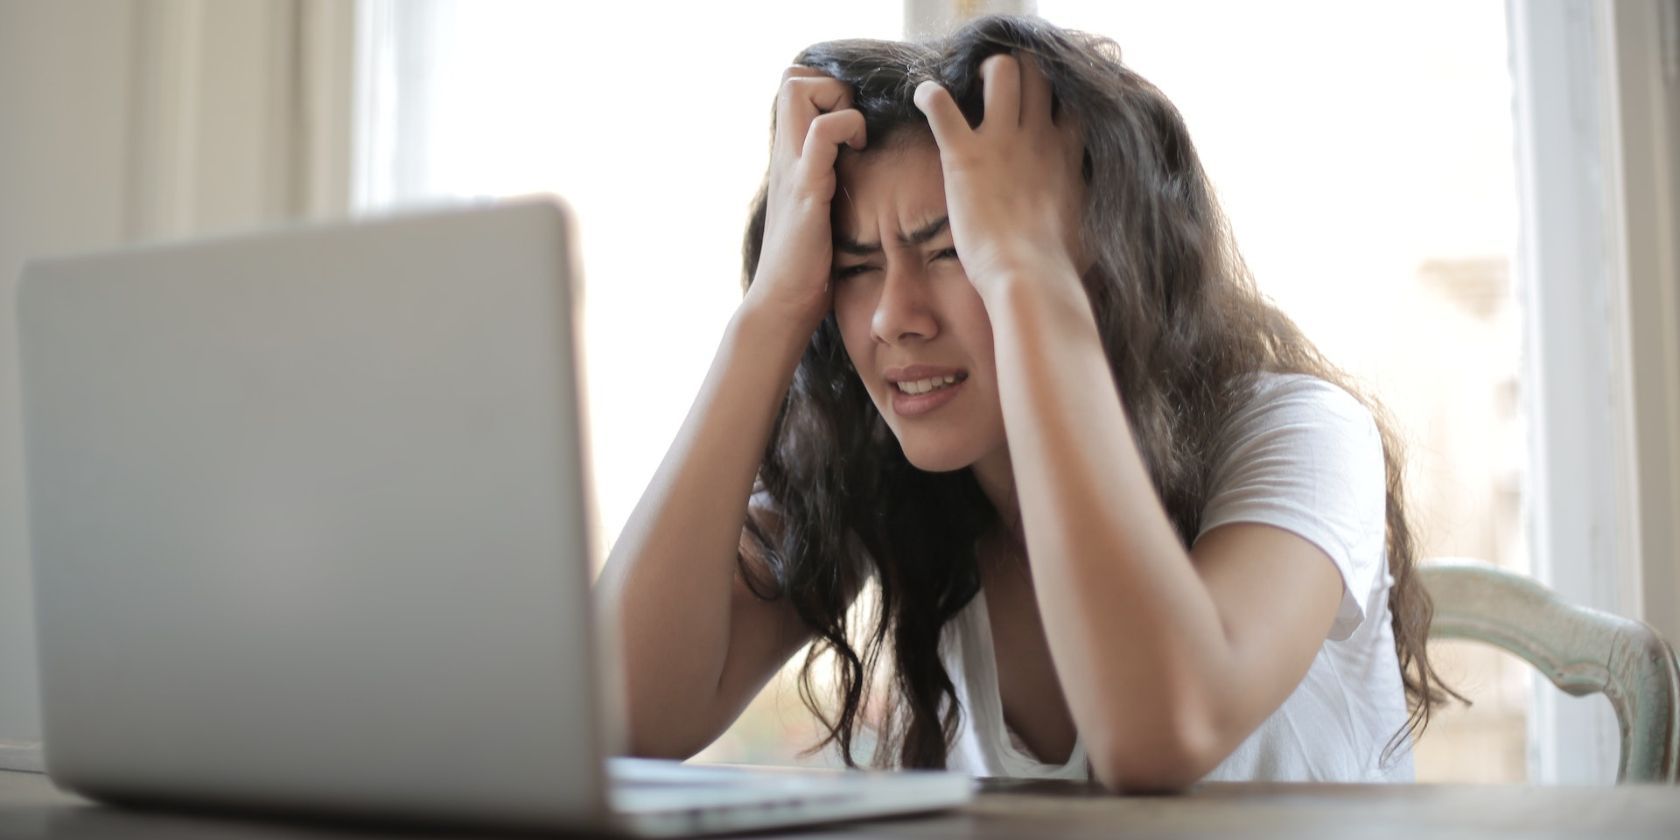 Woman showing frustration while using a laptop